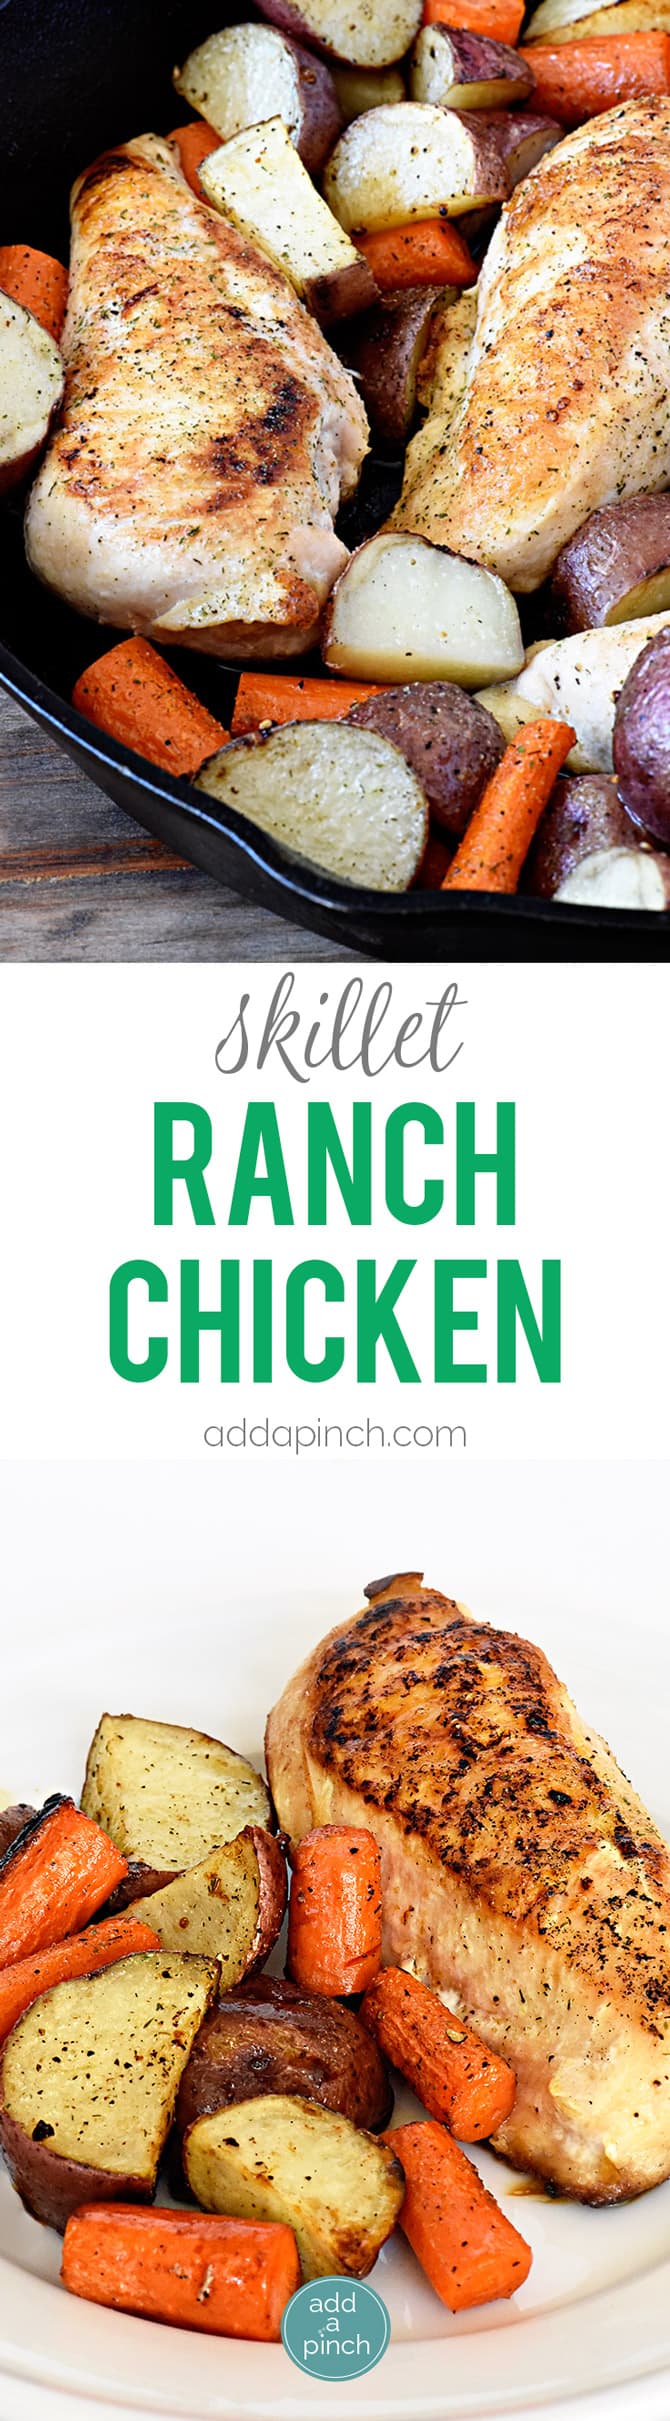 This skillet ranch chicken recipe makes a quick and easy weeknight supper. Full of flavor, this one-skillet meal combines chicken, potatoes, carrots, and my homemade ranch seasoning for a mighty delicious meal! // addapinch.com